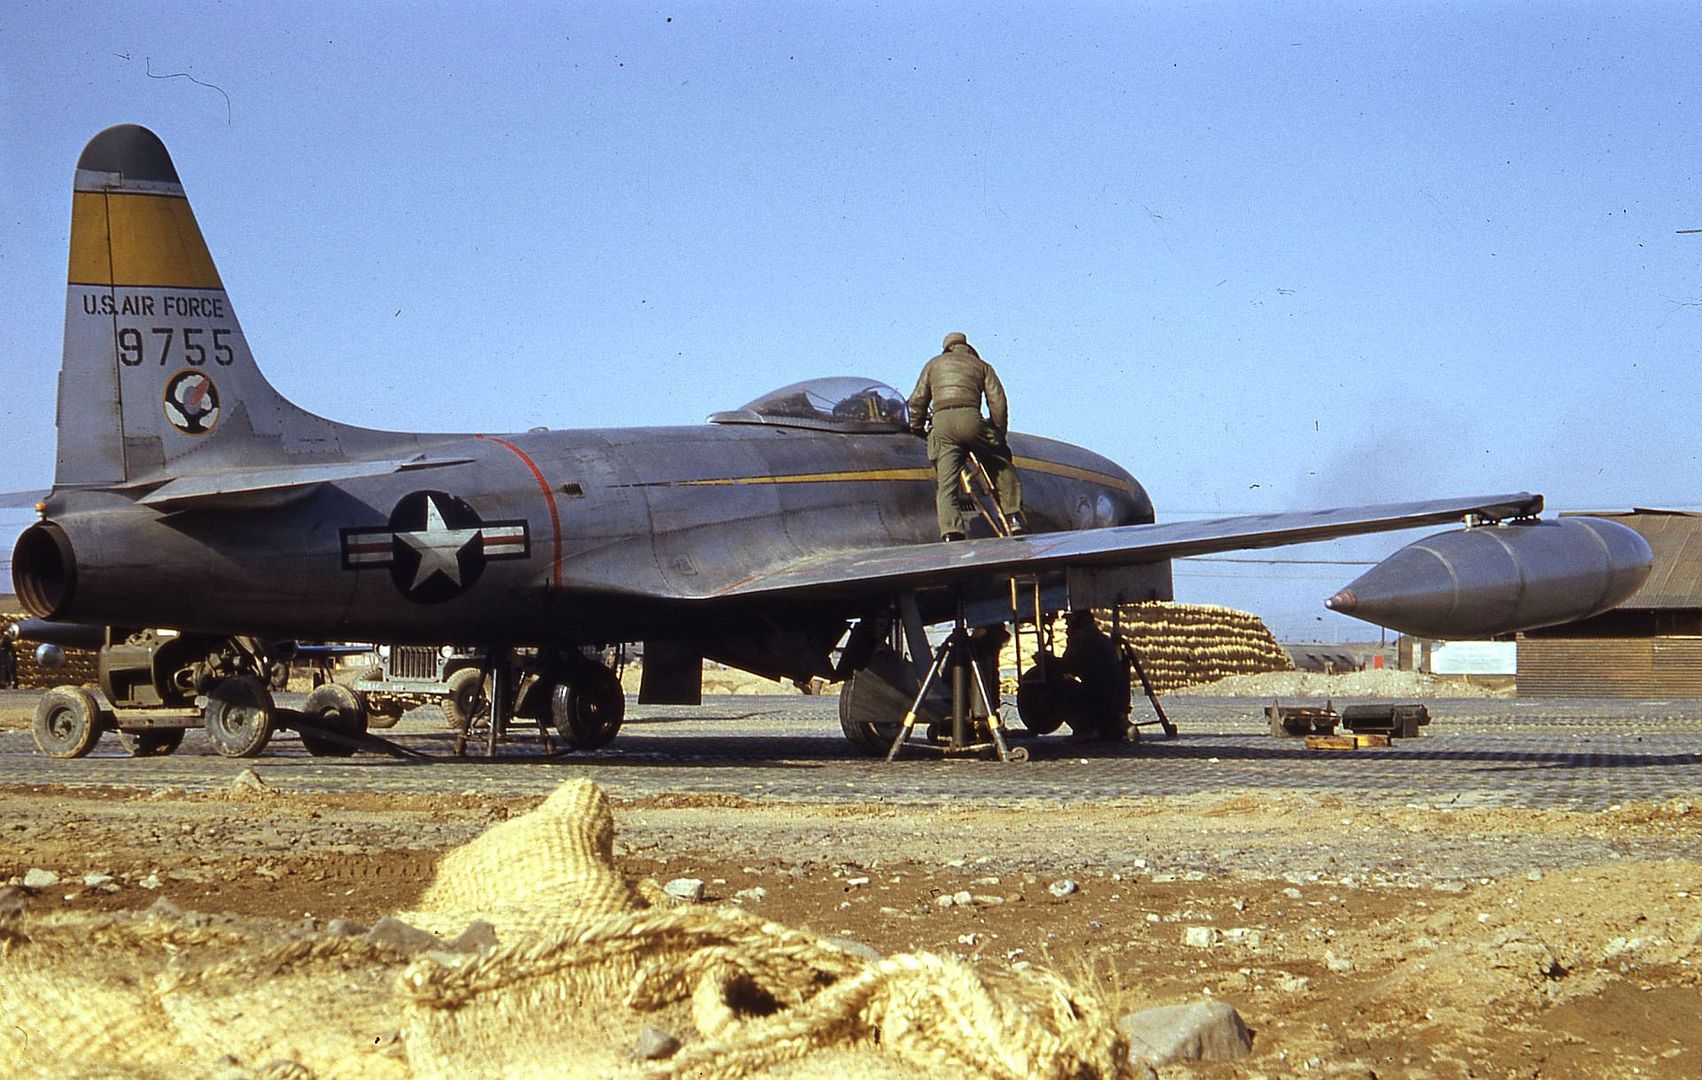 755 Bearing The Markings Of The 41st Fighter Interceptor Squadron